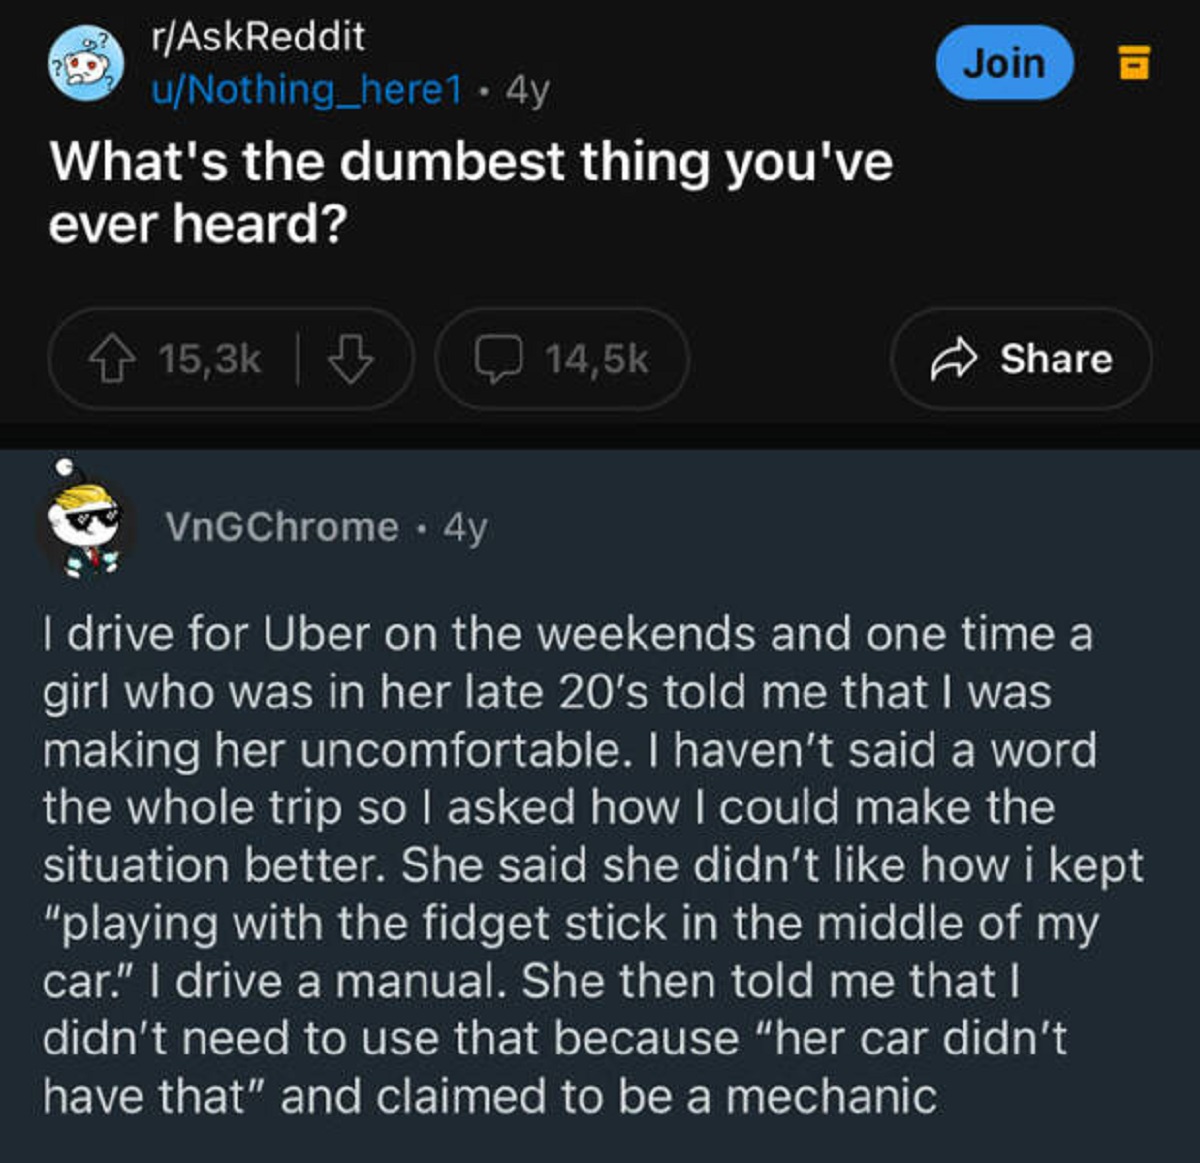 screenshot - rAskReddit uNothing_here1 4y What's the dumbest thing you've ever heard? Join VnGChrome 4y I drive for Uber on the weekends and one time a girl who was in her late 20's told me that I was making her uncomfortable. I haven't said a word the wh